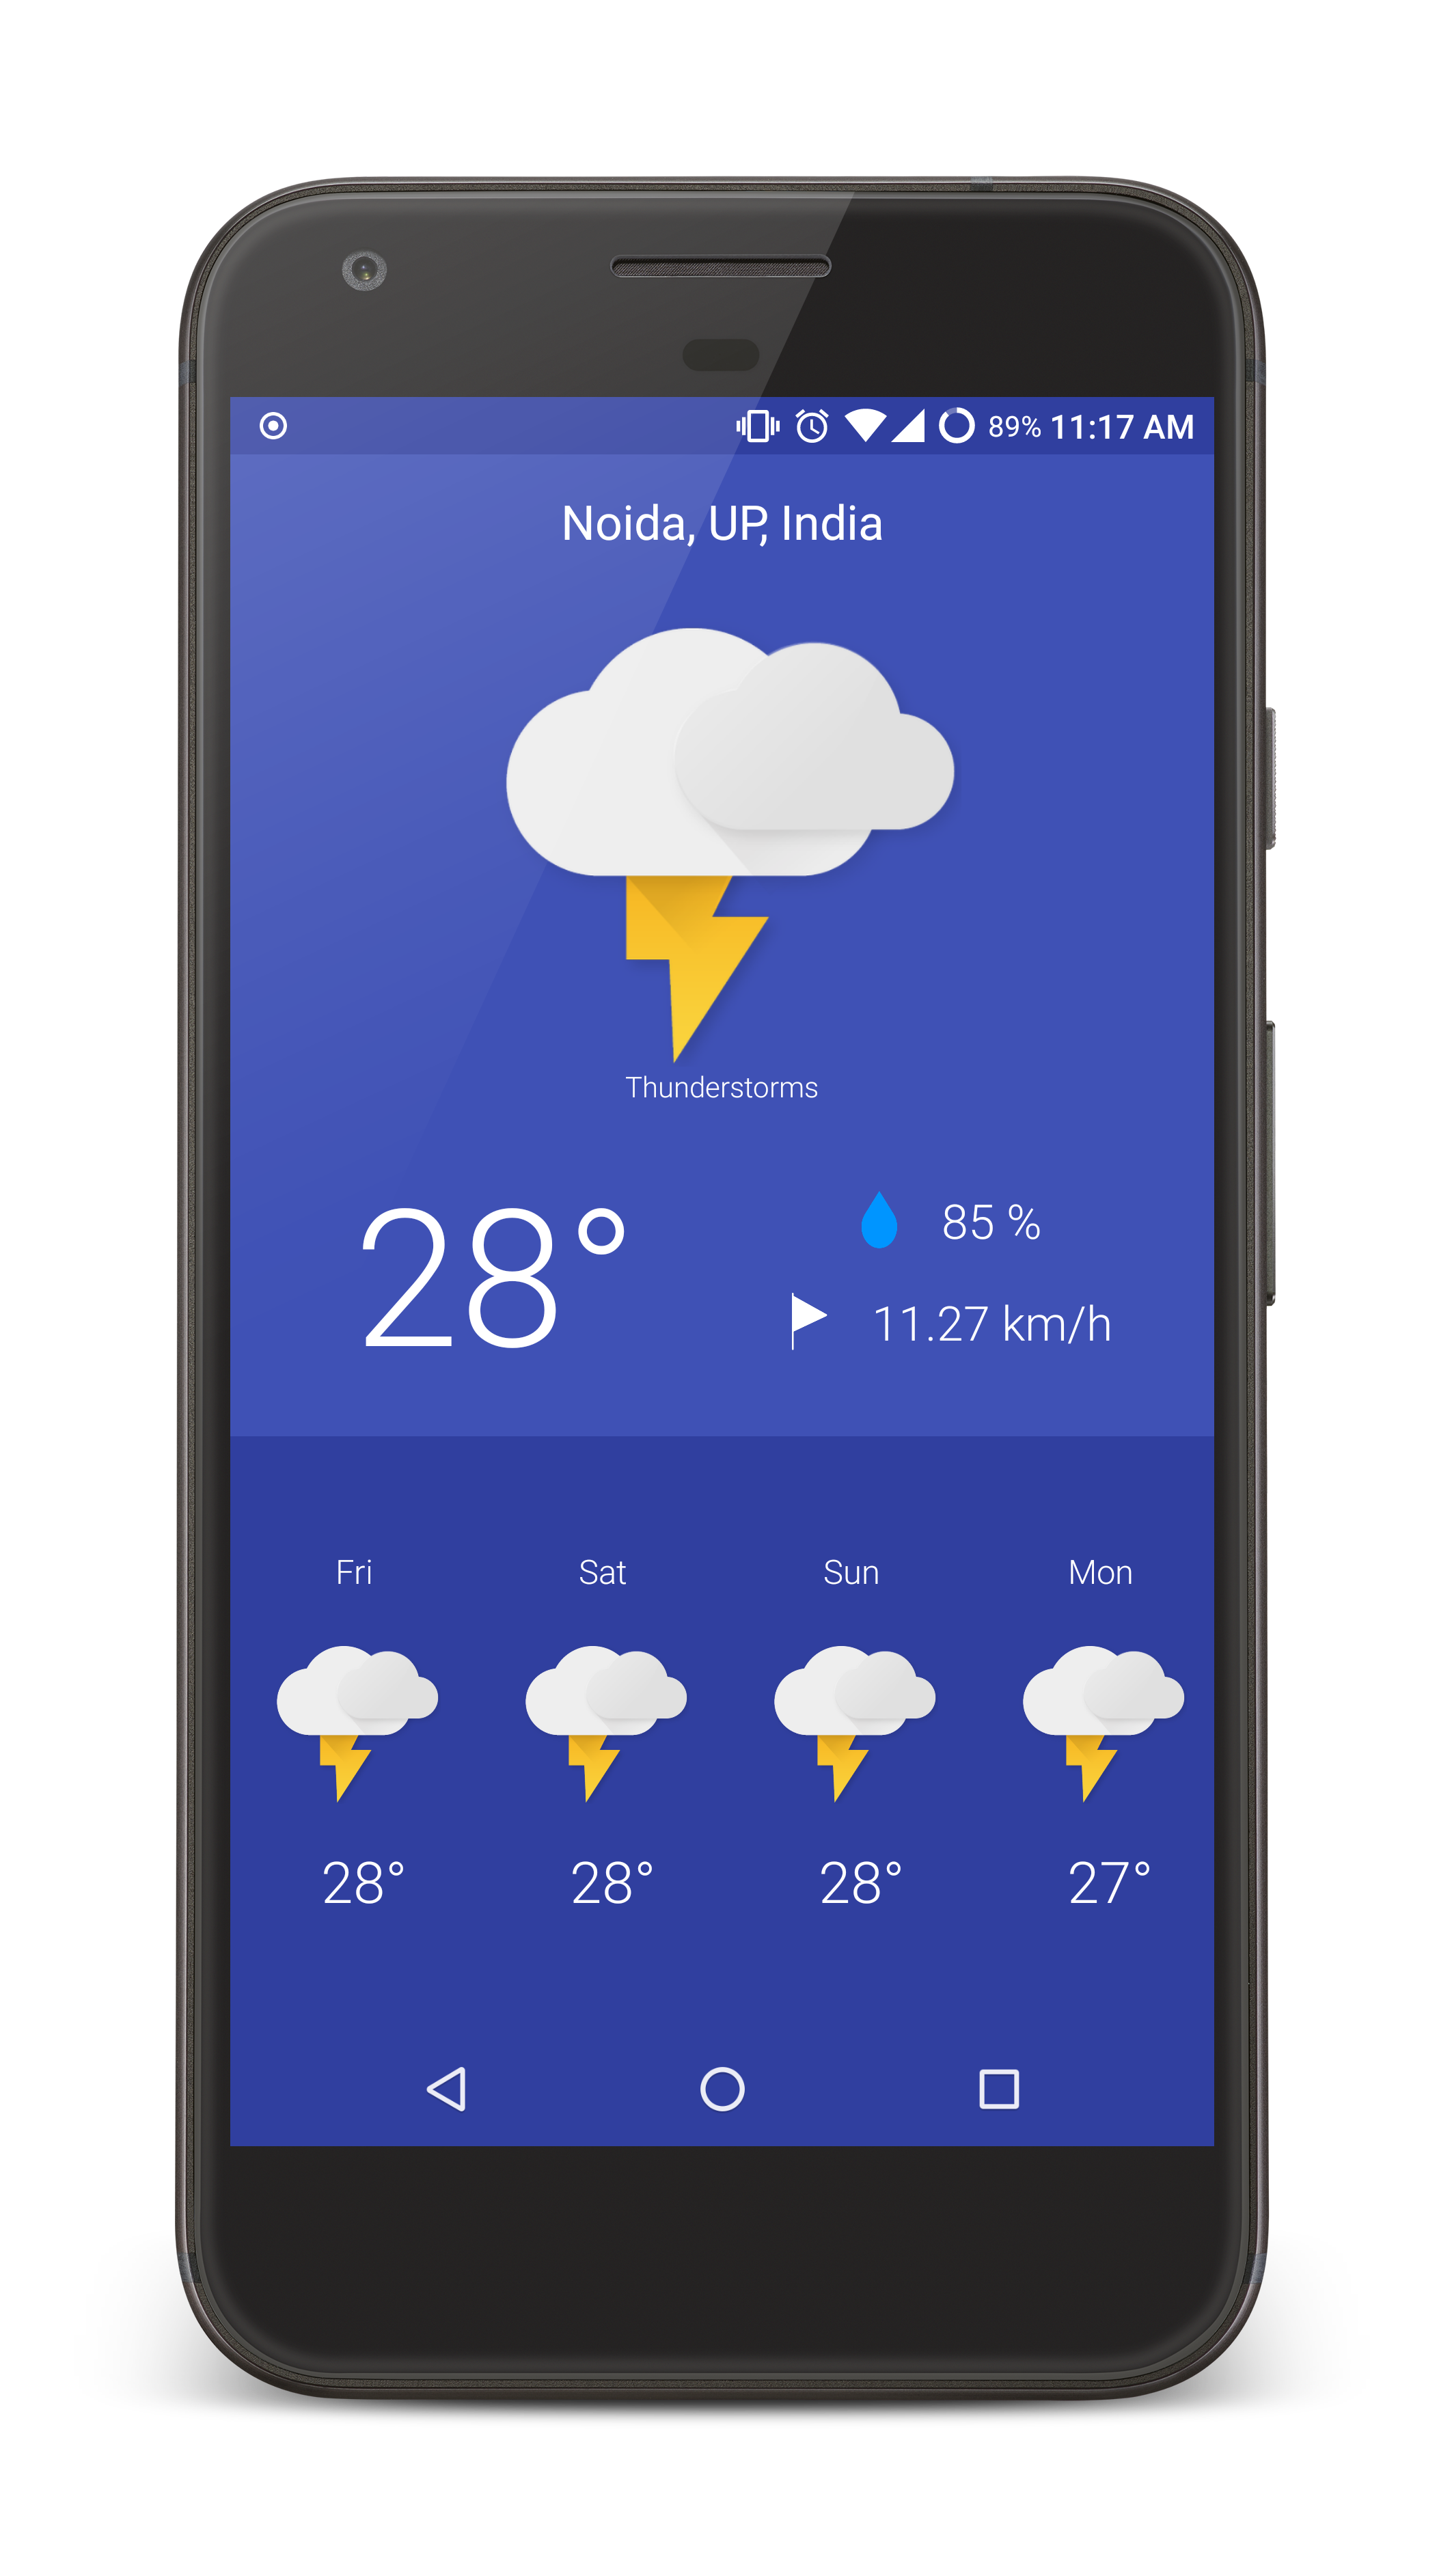 the best weather radar app for android